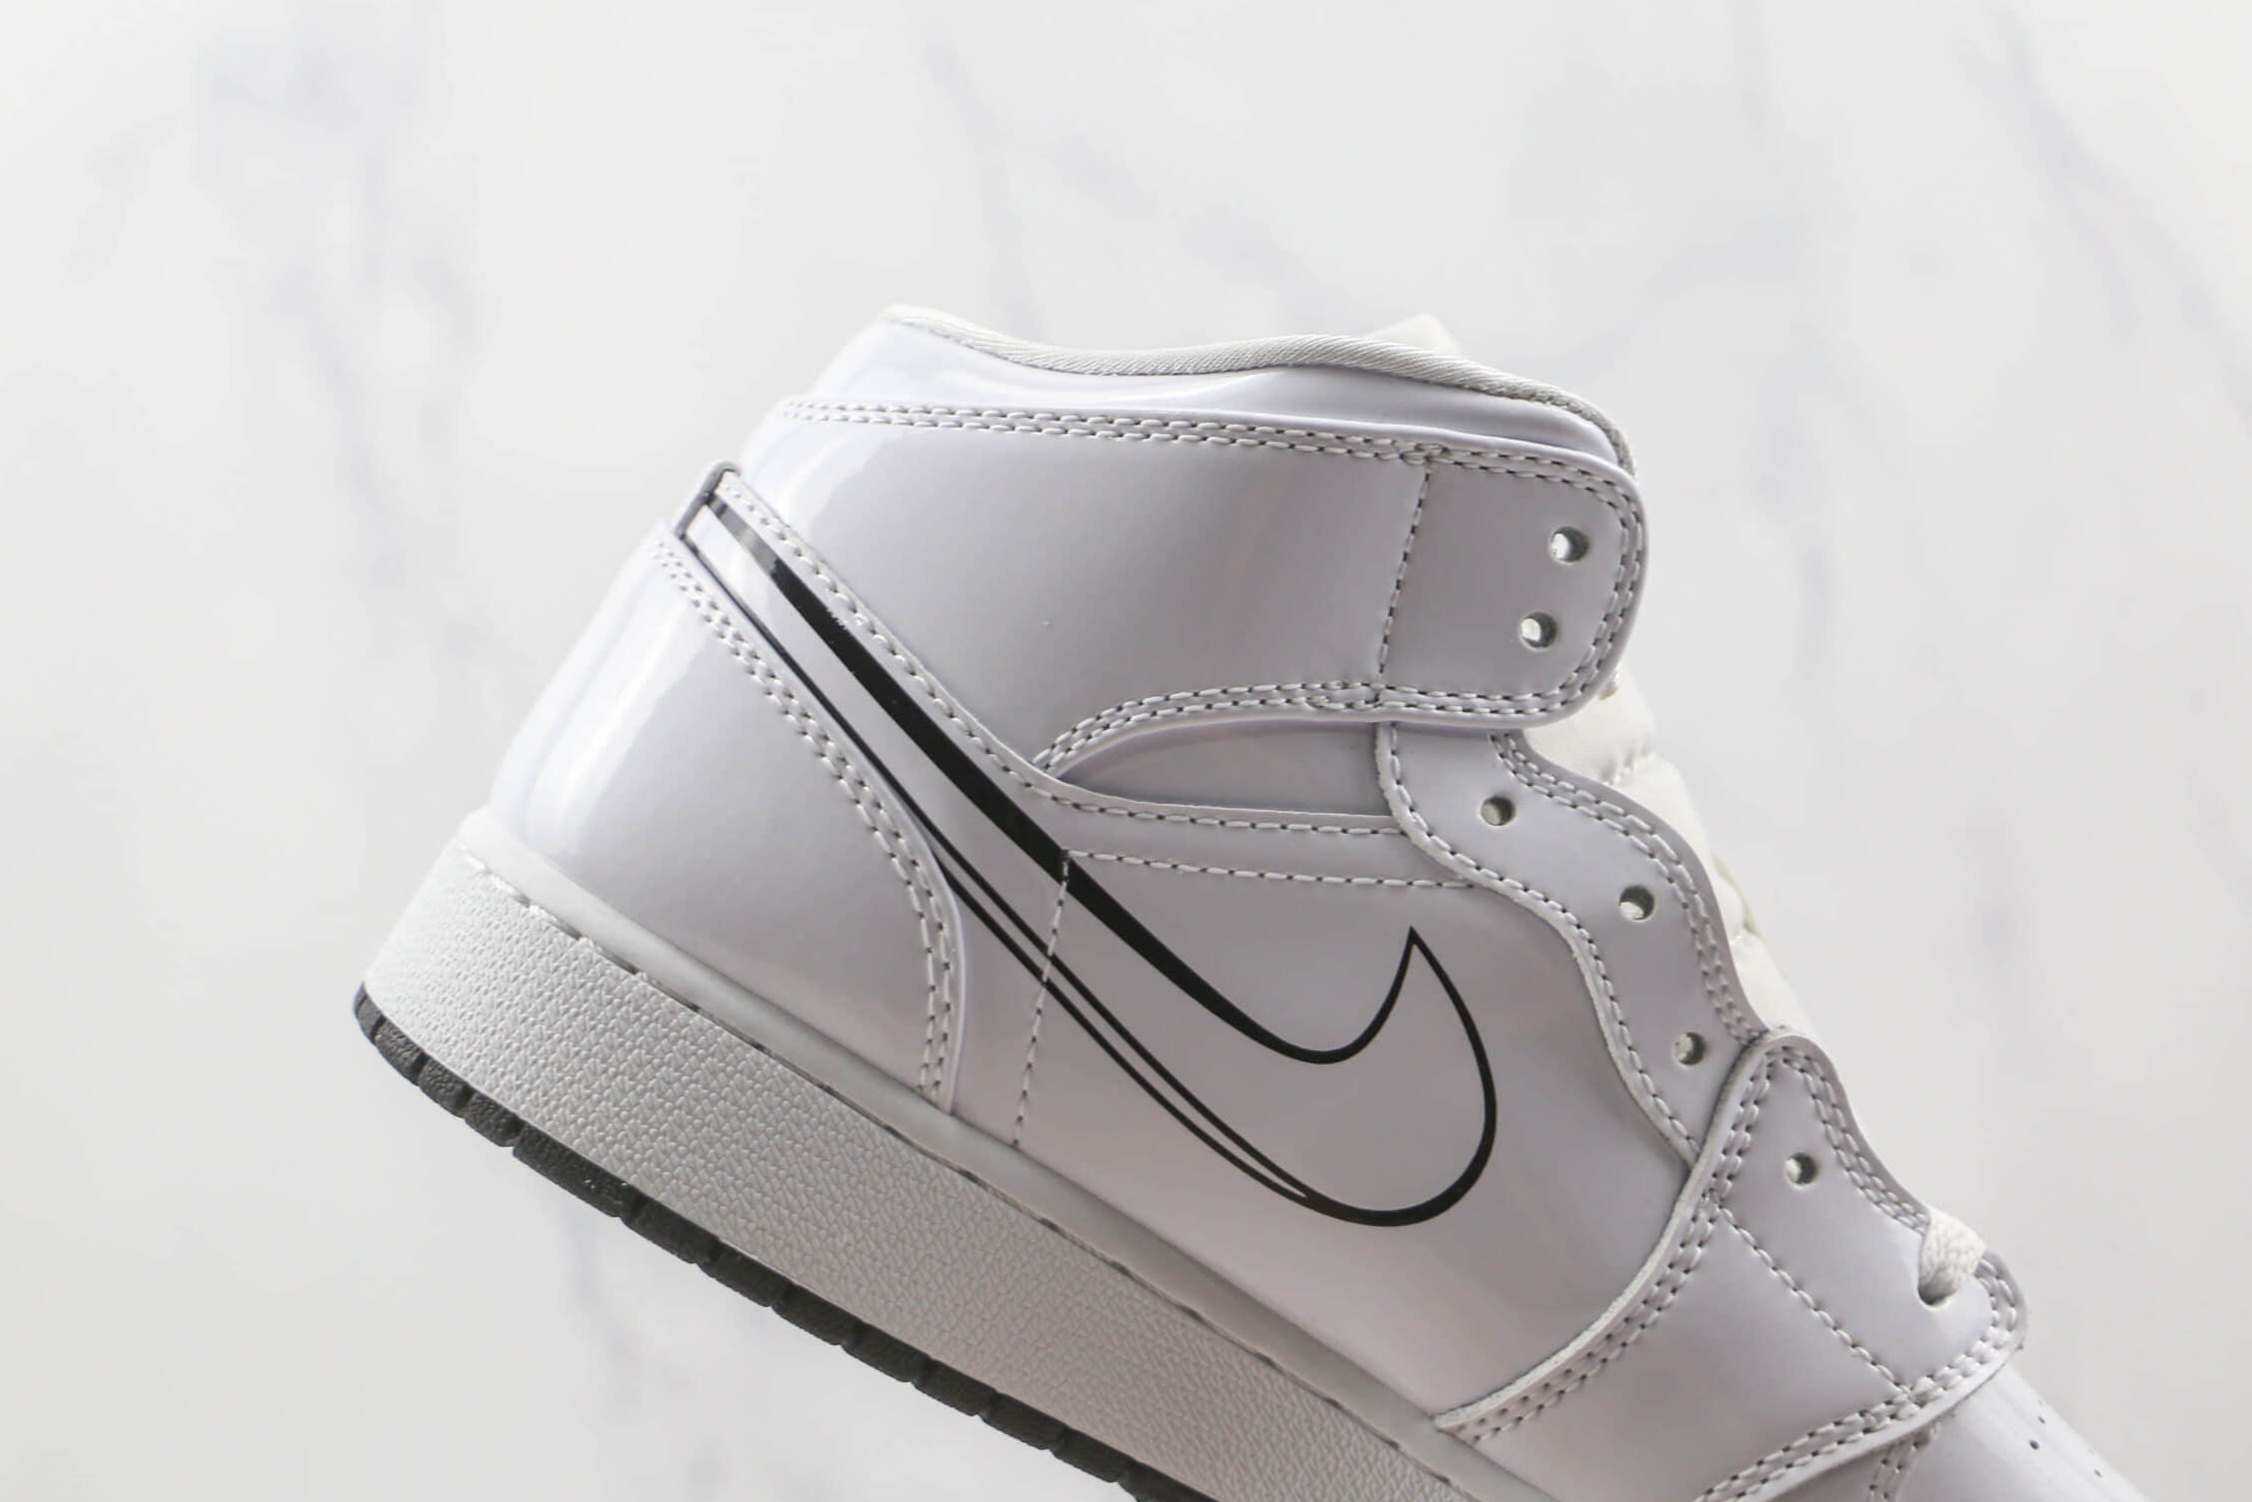 Air Jordan 1 Mid 'Schematic' DQ1864-100: Limited Edition Design for Sneaker Enthusiasts